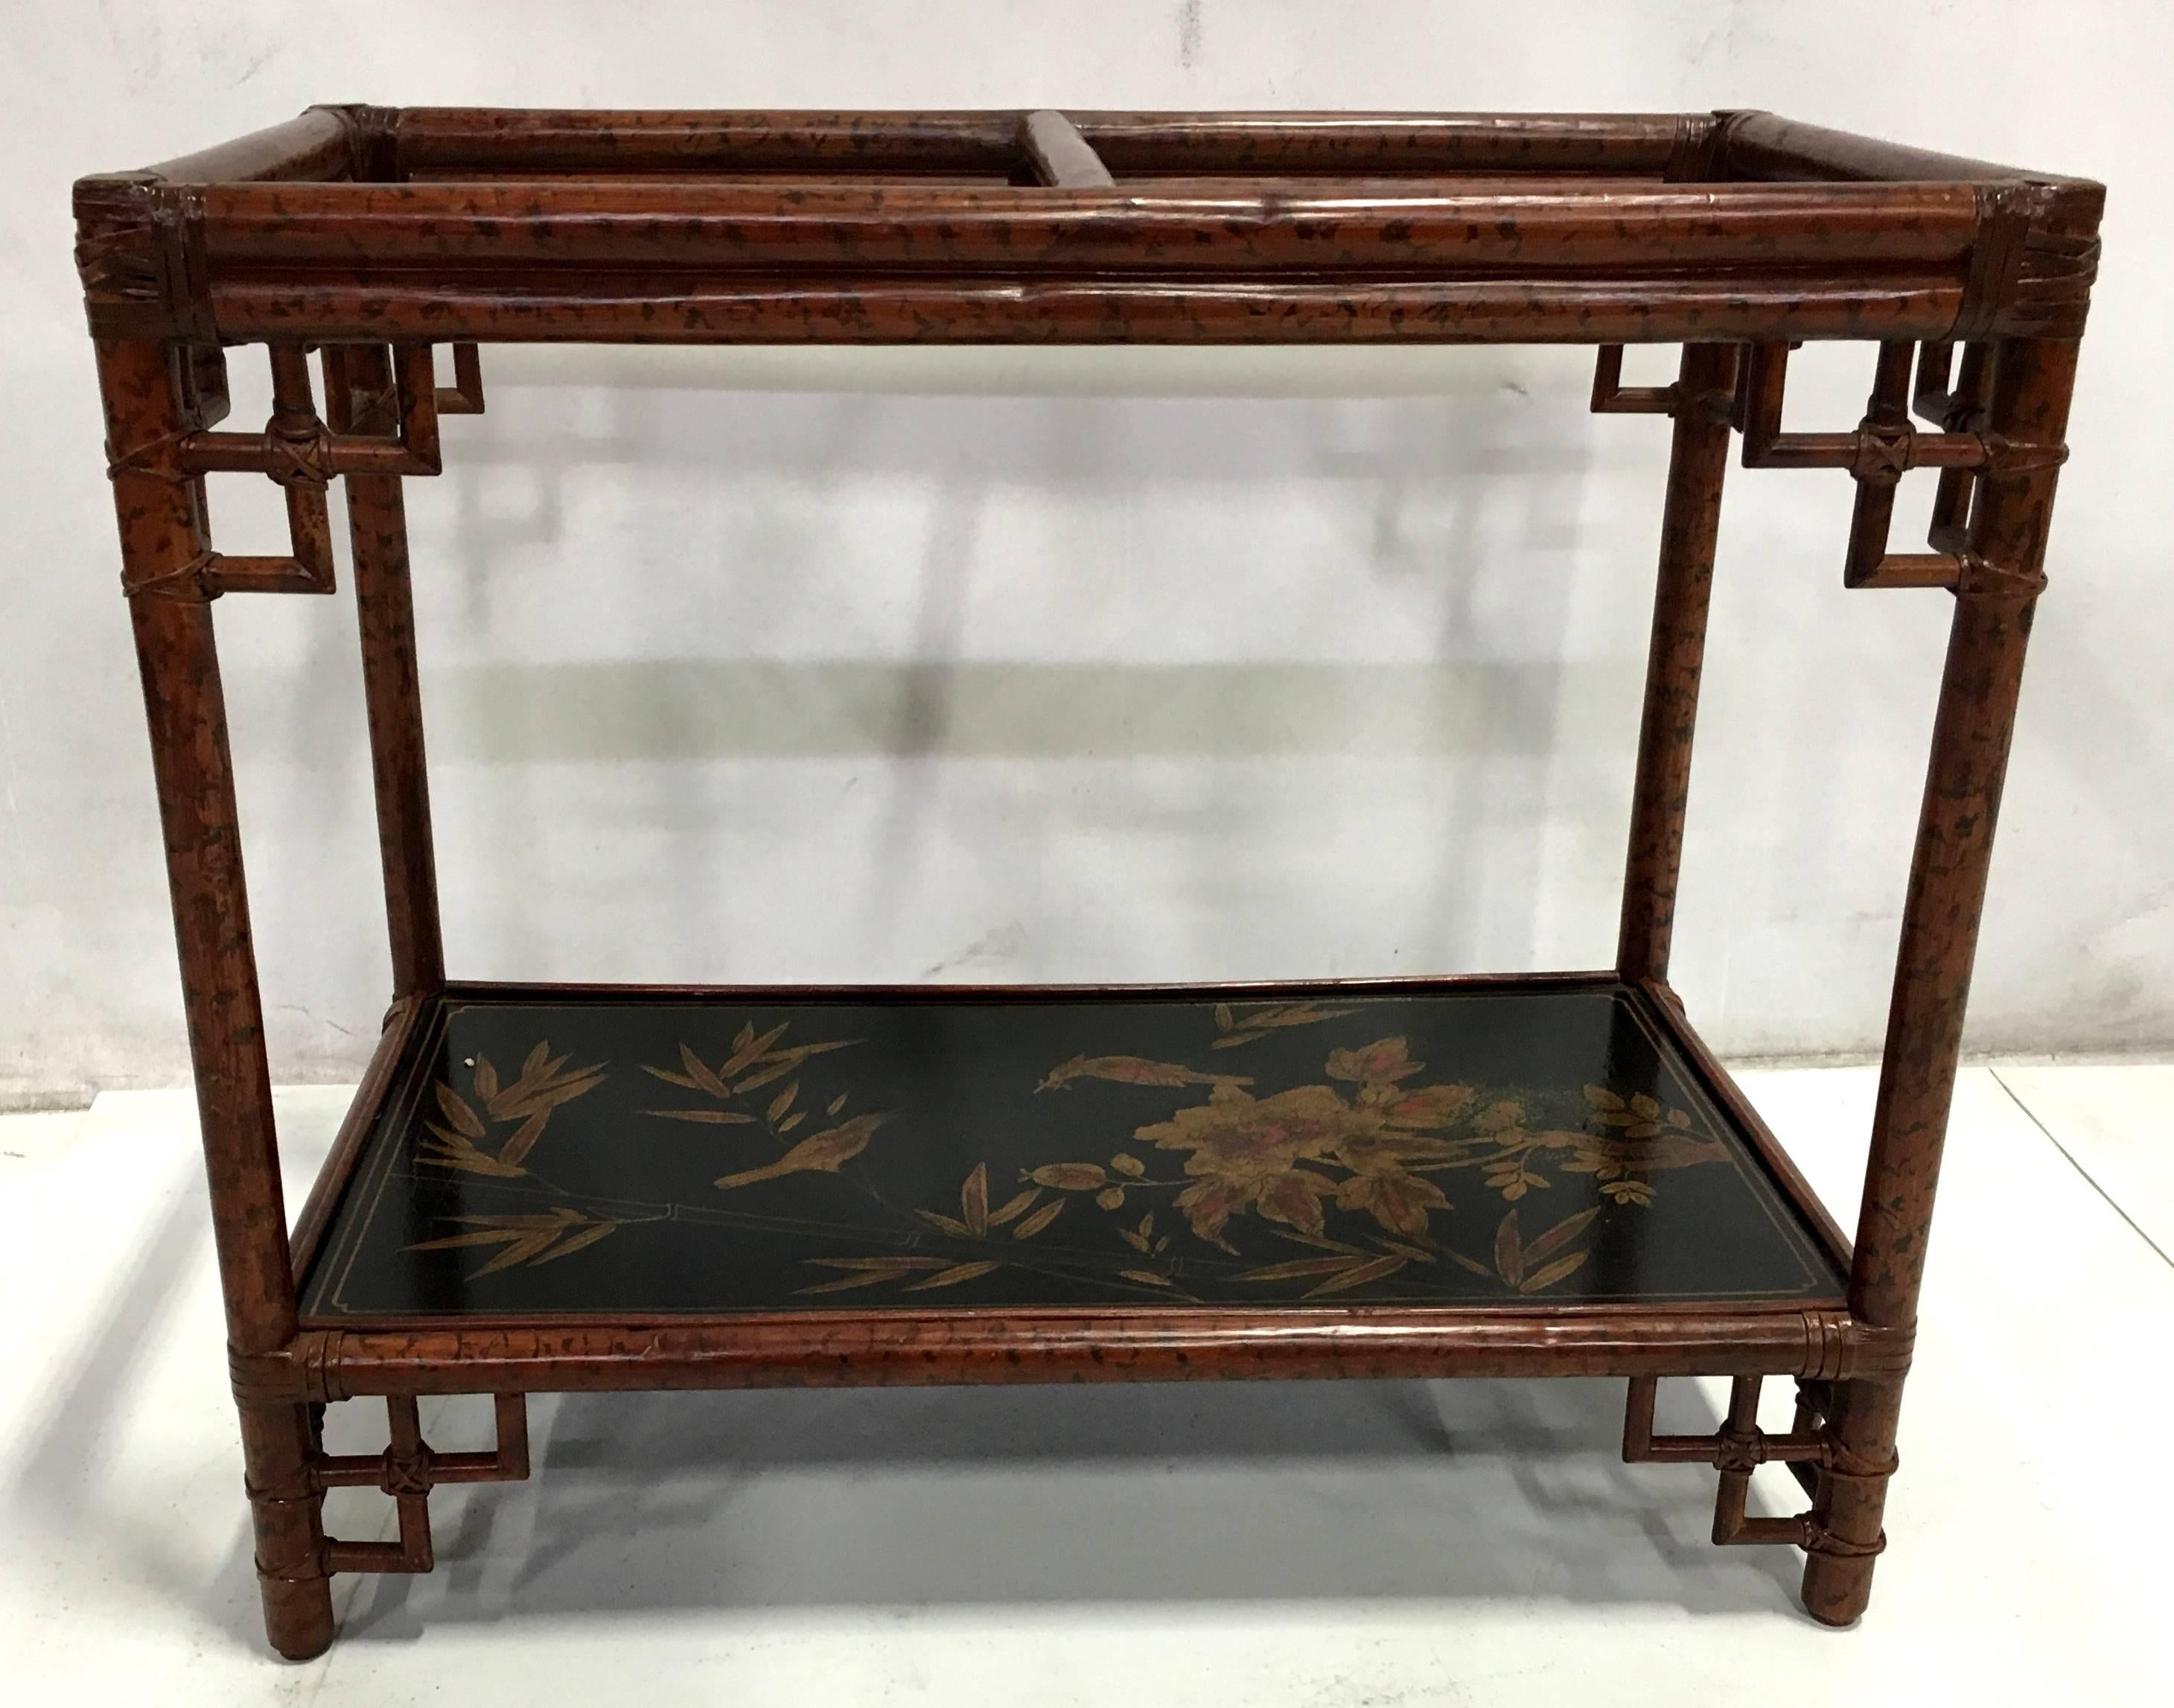 Lovely pair of rattan chinoiserie side tables by Maitland-Smith featuring their usual Fine finish painting. The lacquer panels on each table feature beautiful scenes of birds and foliage. New glass tops will be provided.